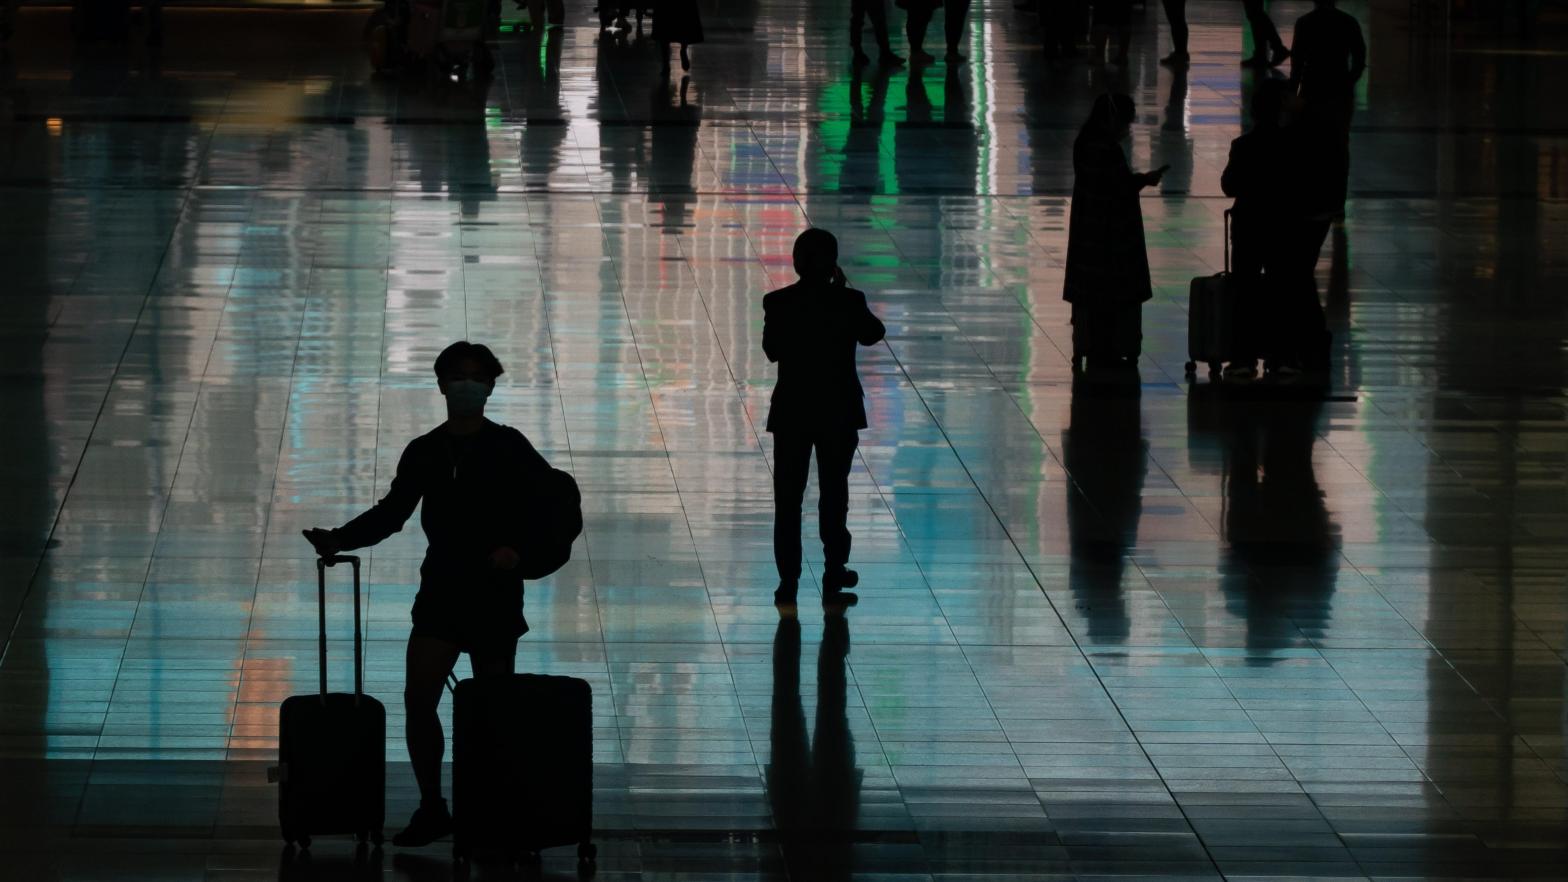 Bad weather, flight cancellations, and lost luggage have made travelling without incident over the holidays next to impossible.  (Image: Anthony Kwan, Getty Images)